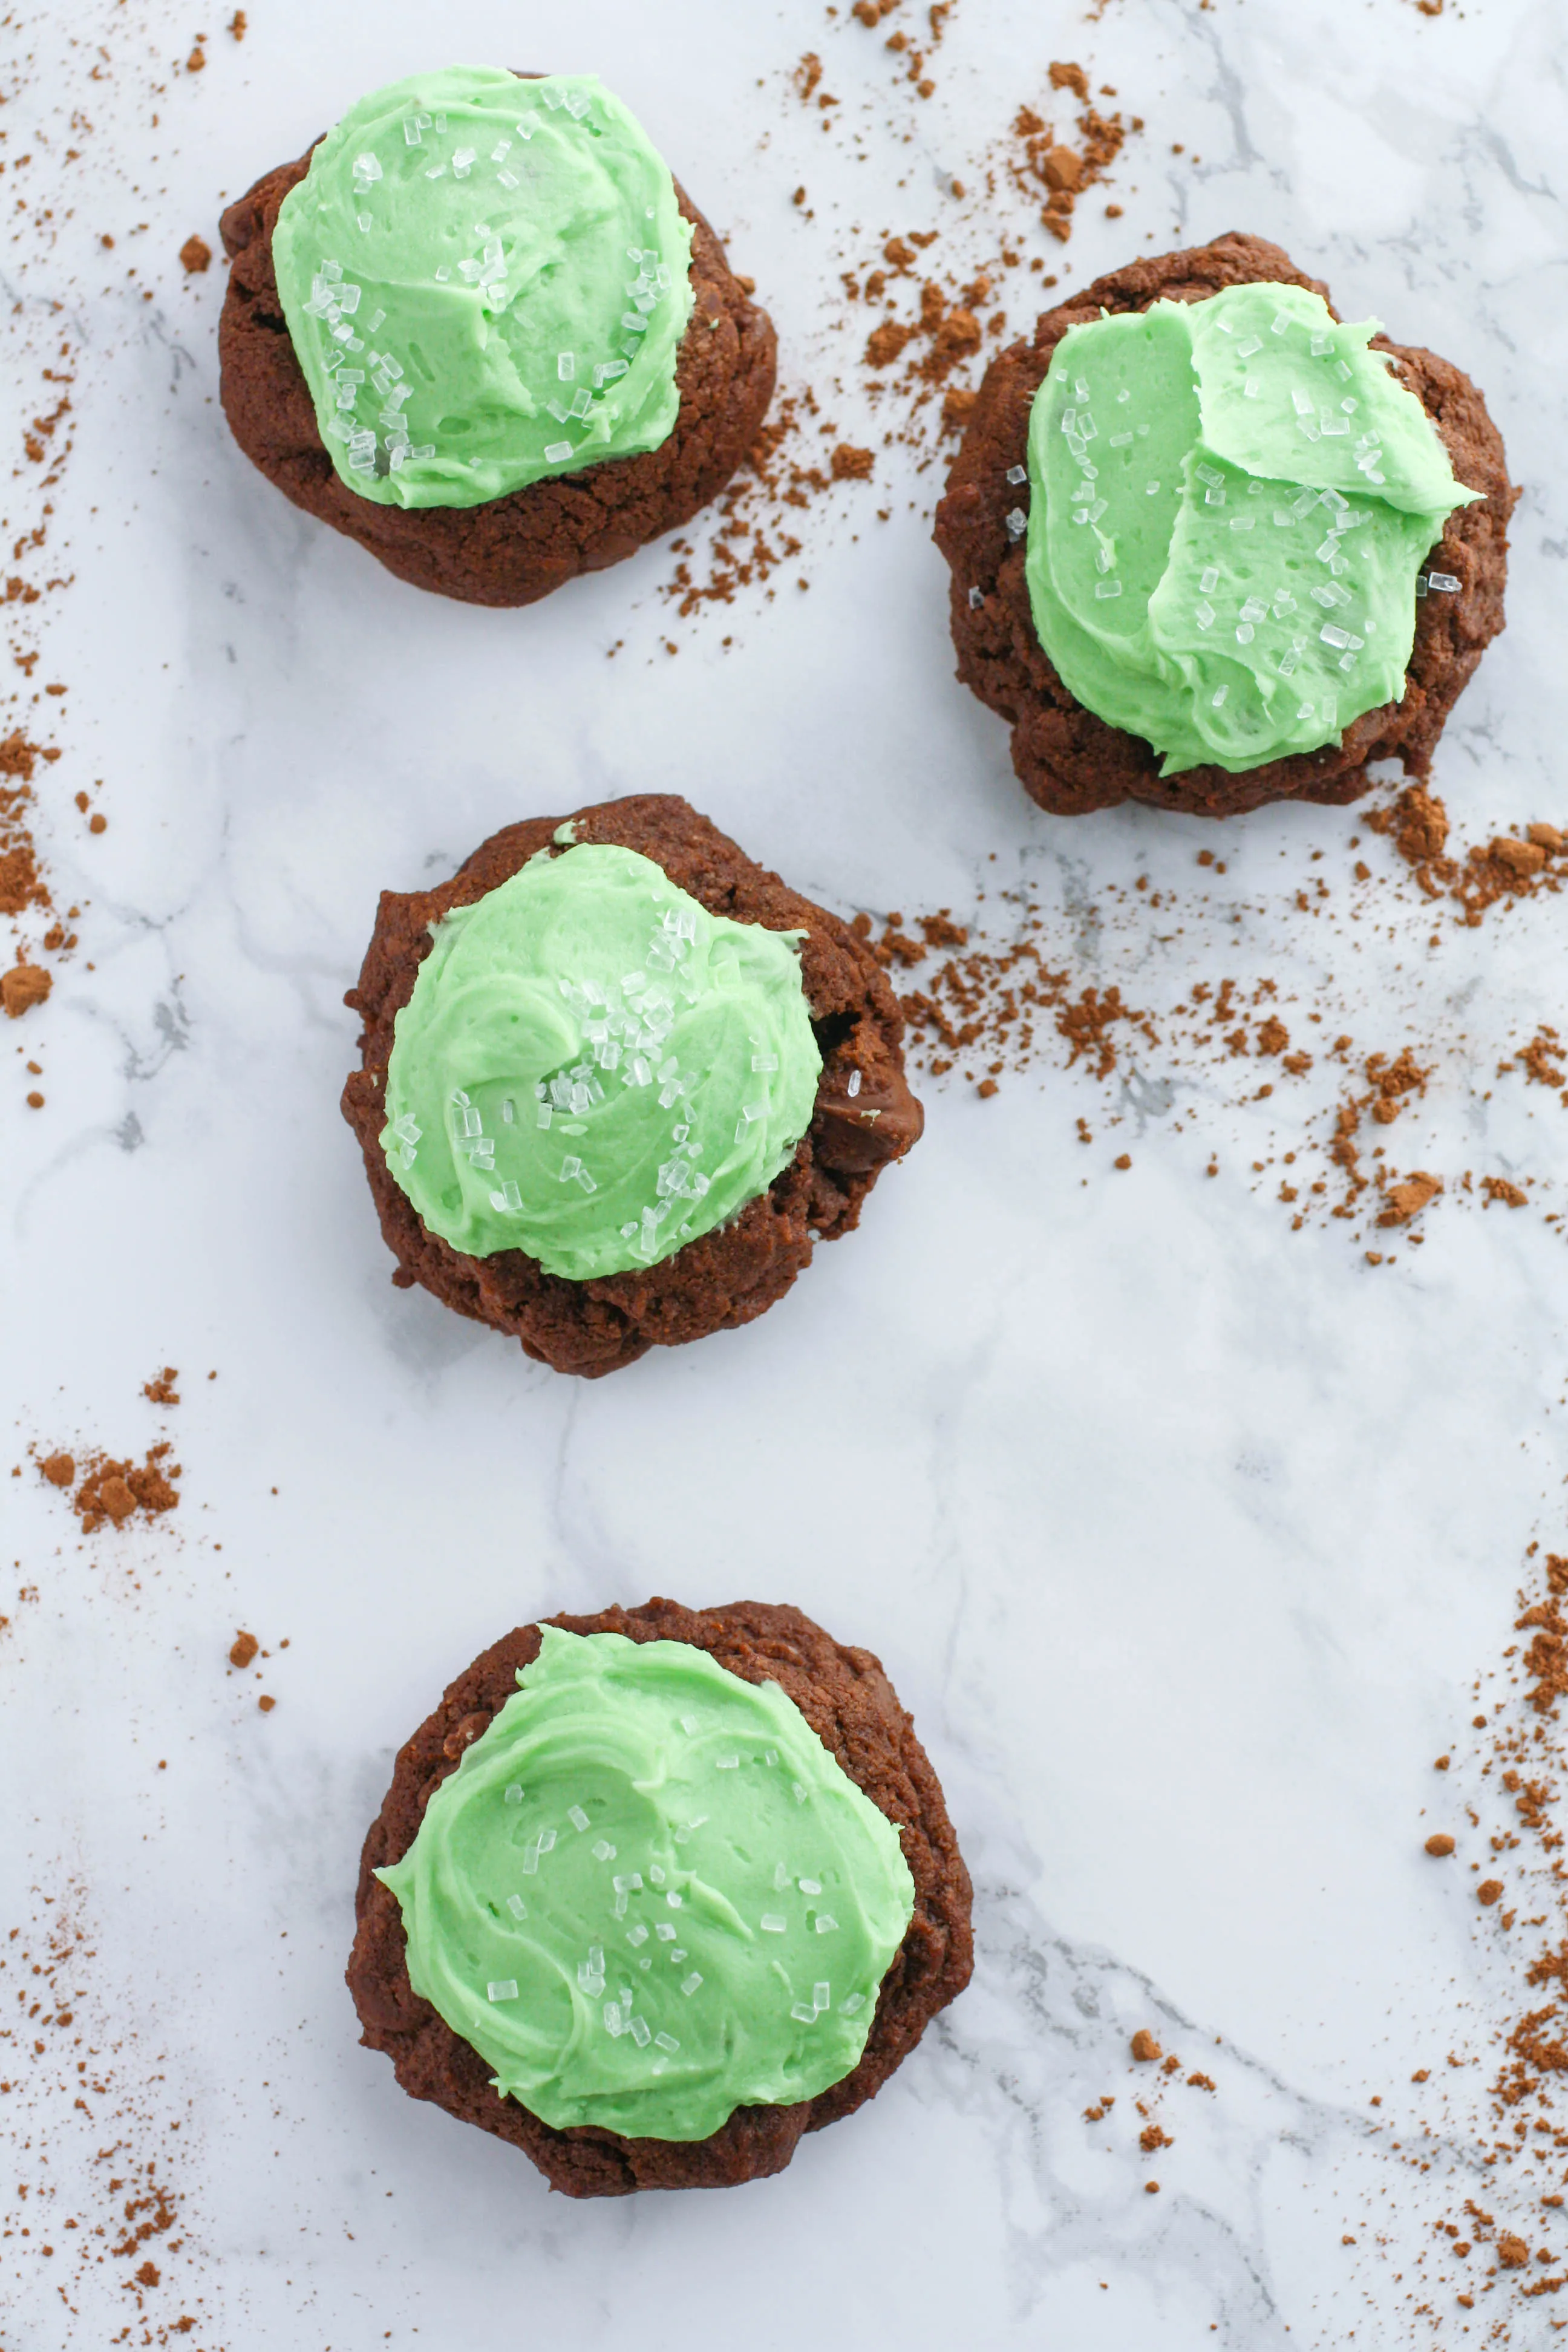 Double Chocolate Cookies with Baileys Buttercream Frosting are delicious treats! Why not enjoy Double Chocolate Cookies with Baileys Buttercream Frosting for St. Patrick's Day?